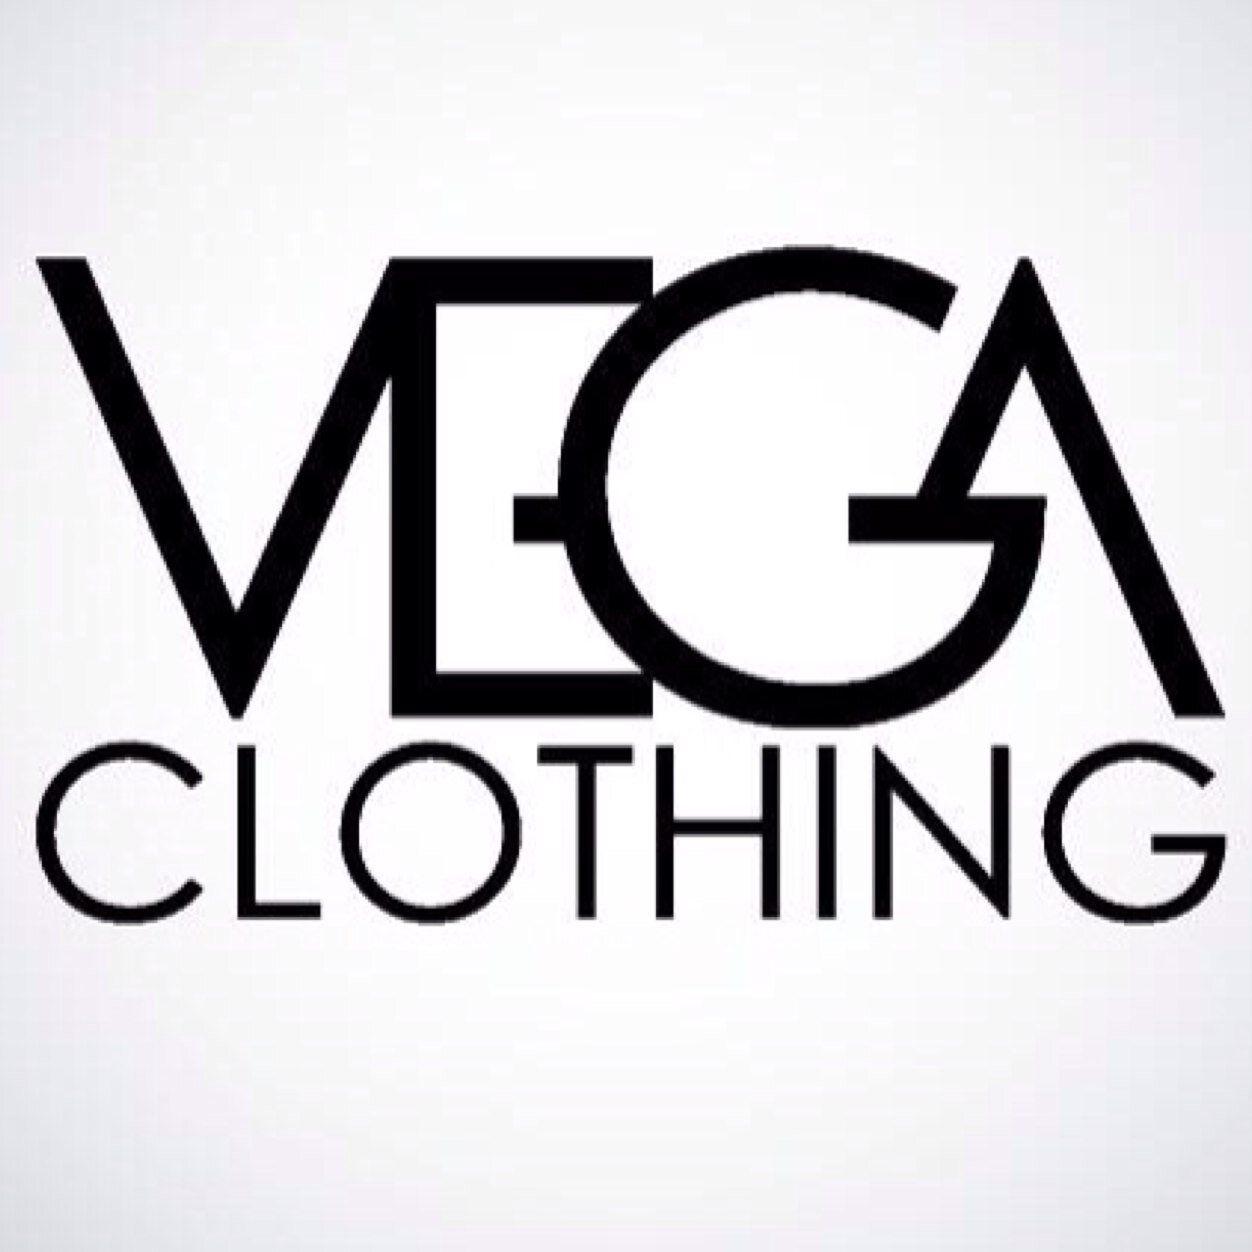 Well Known Clothing Logo - VEGA Clothing Article: The Inspiration Behind 20